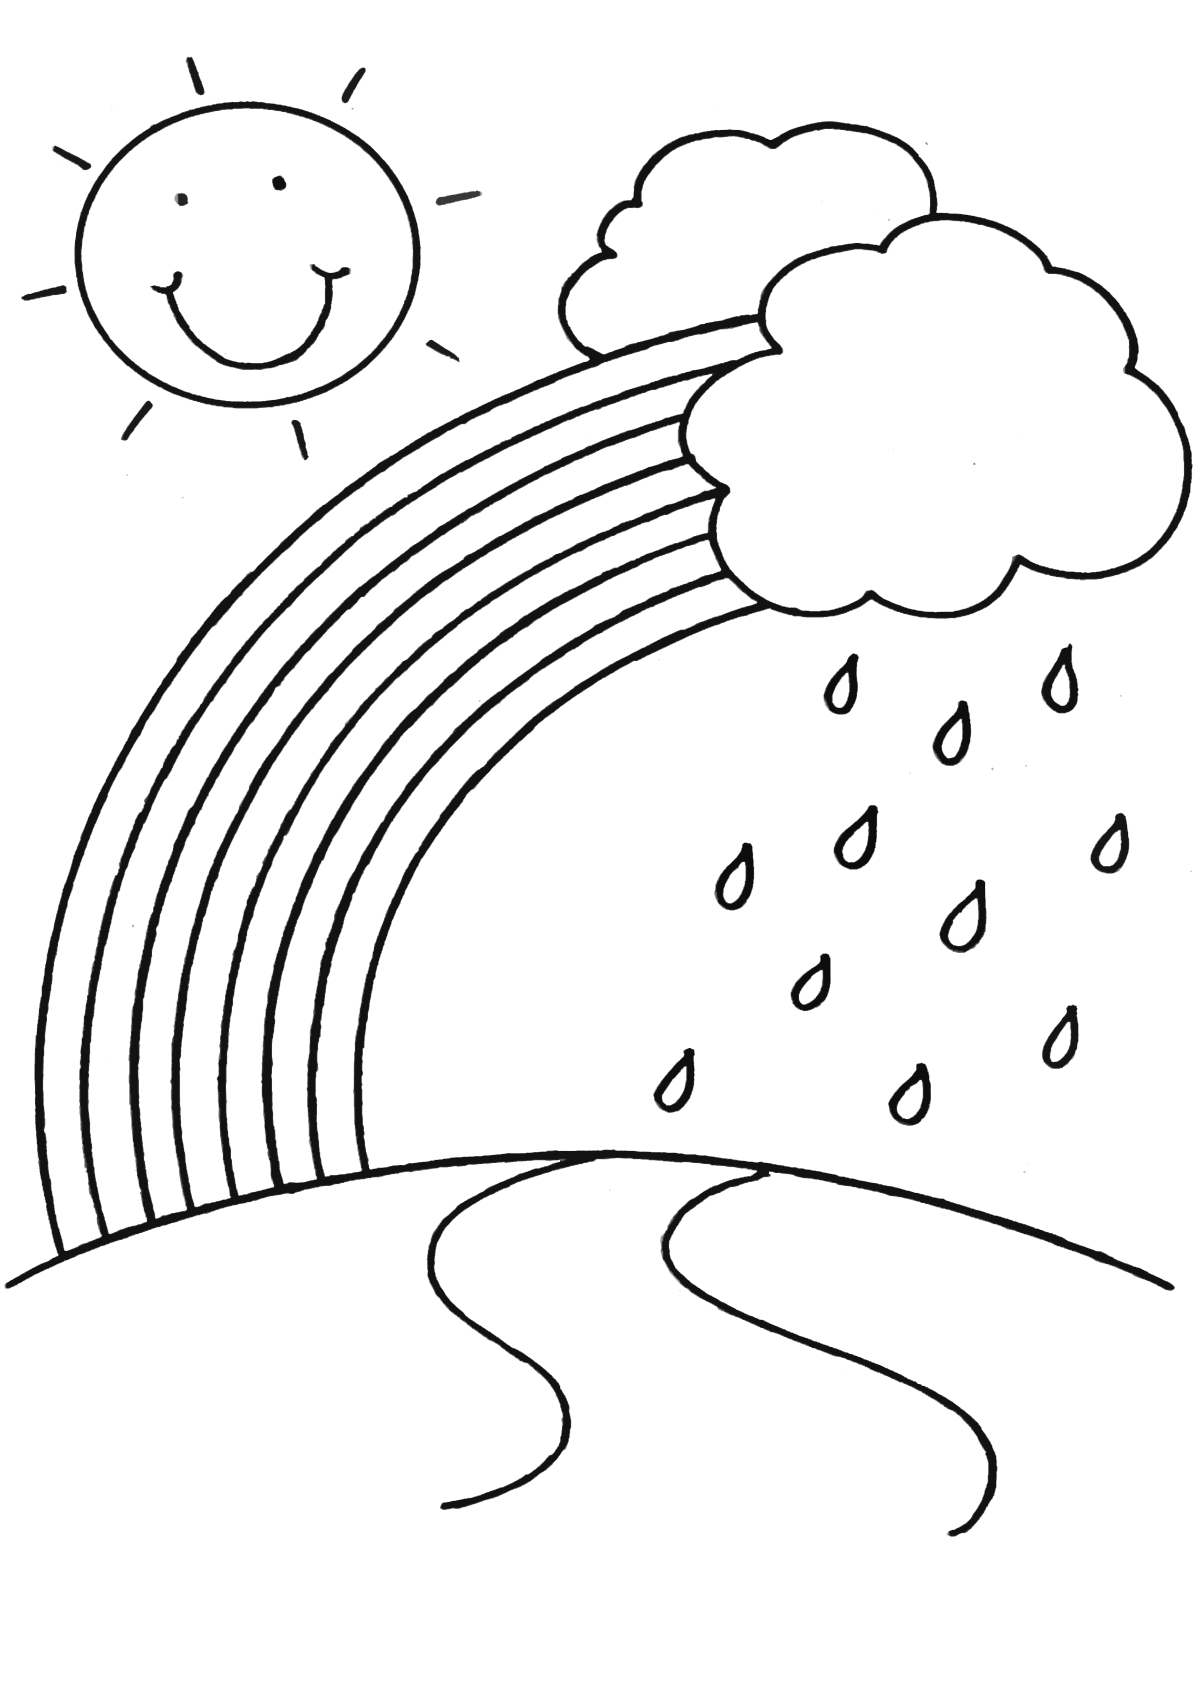 colouring sheet rainbow don39t eat the paste rainbow love coloring page rainbow colouring sheet 